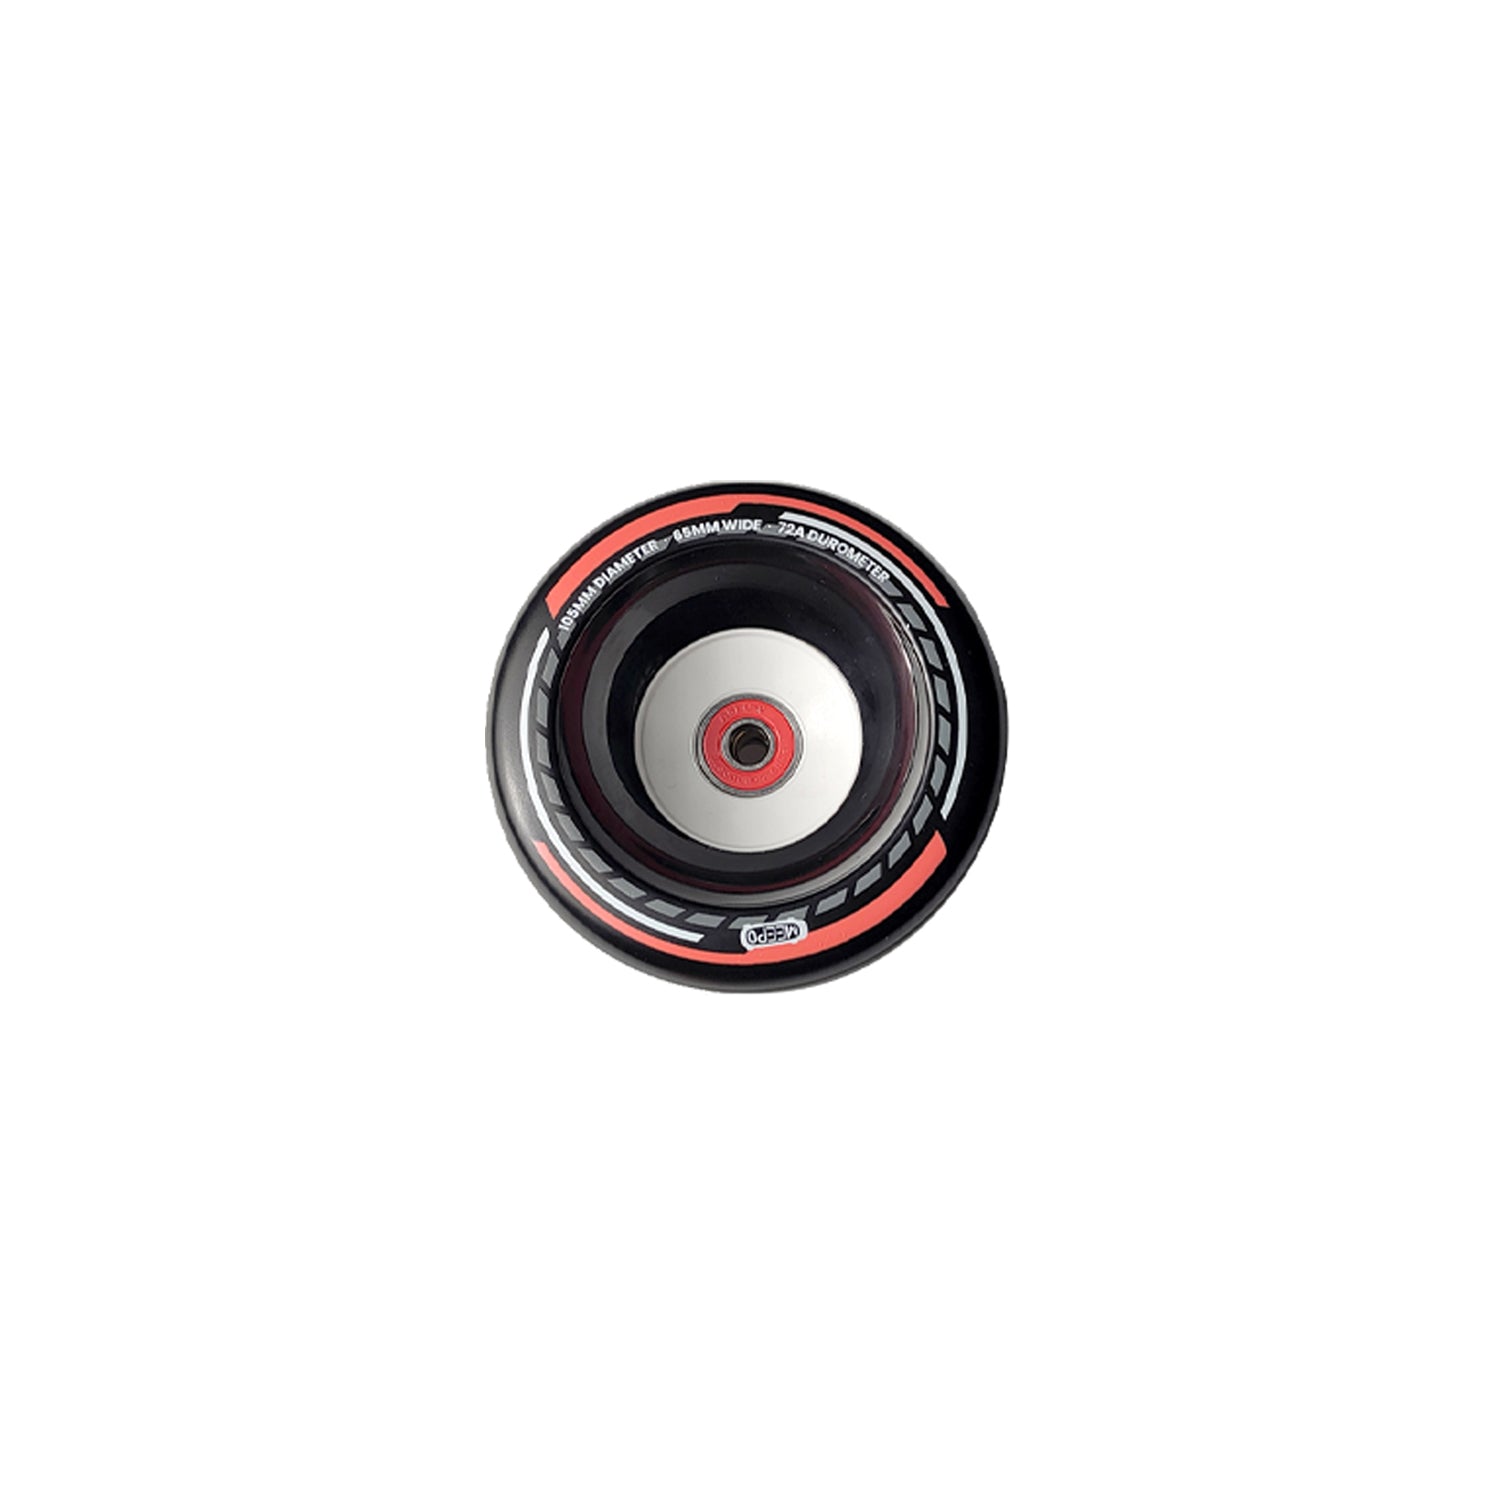 Meepo Cyclone 105s wheels Set - Next-Level Street Wheels with Enhanced Grip and Unmatched Shock Absorption